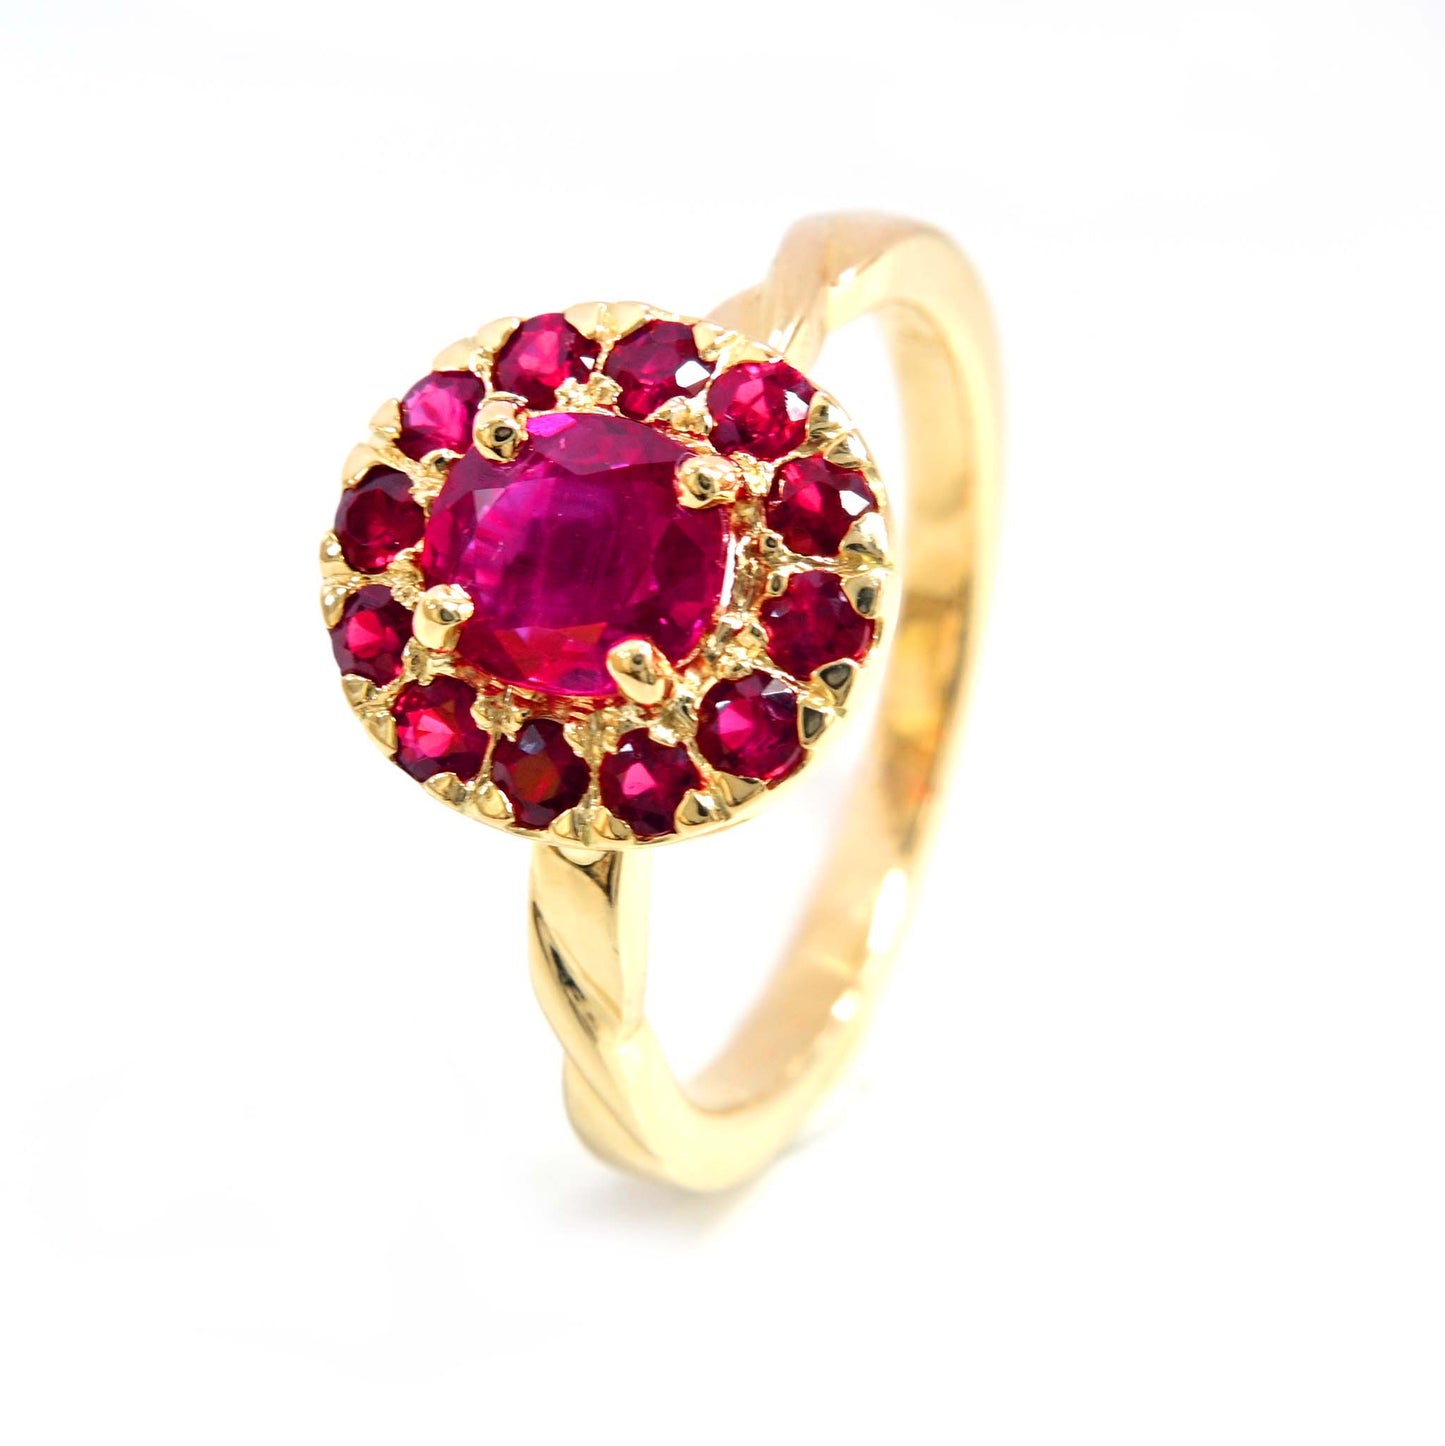 Eye-catching ruby ring with a radiant halo, perfect for special occasions.